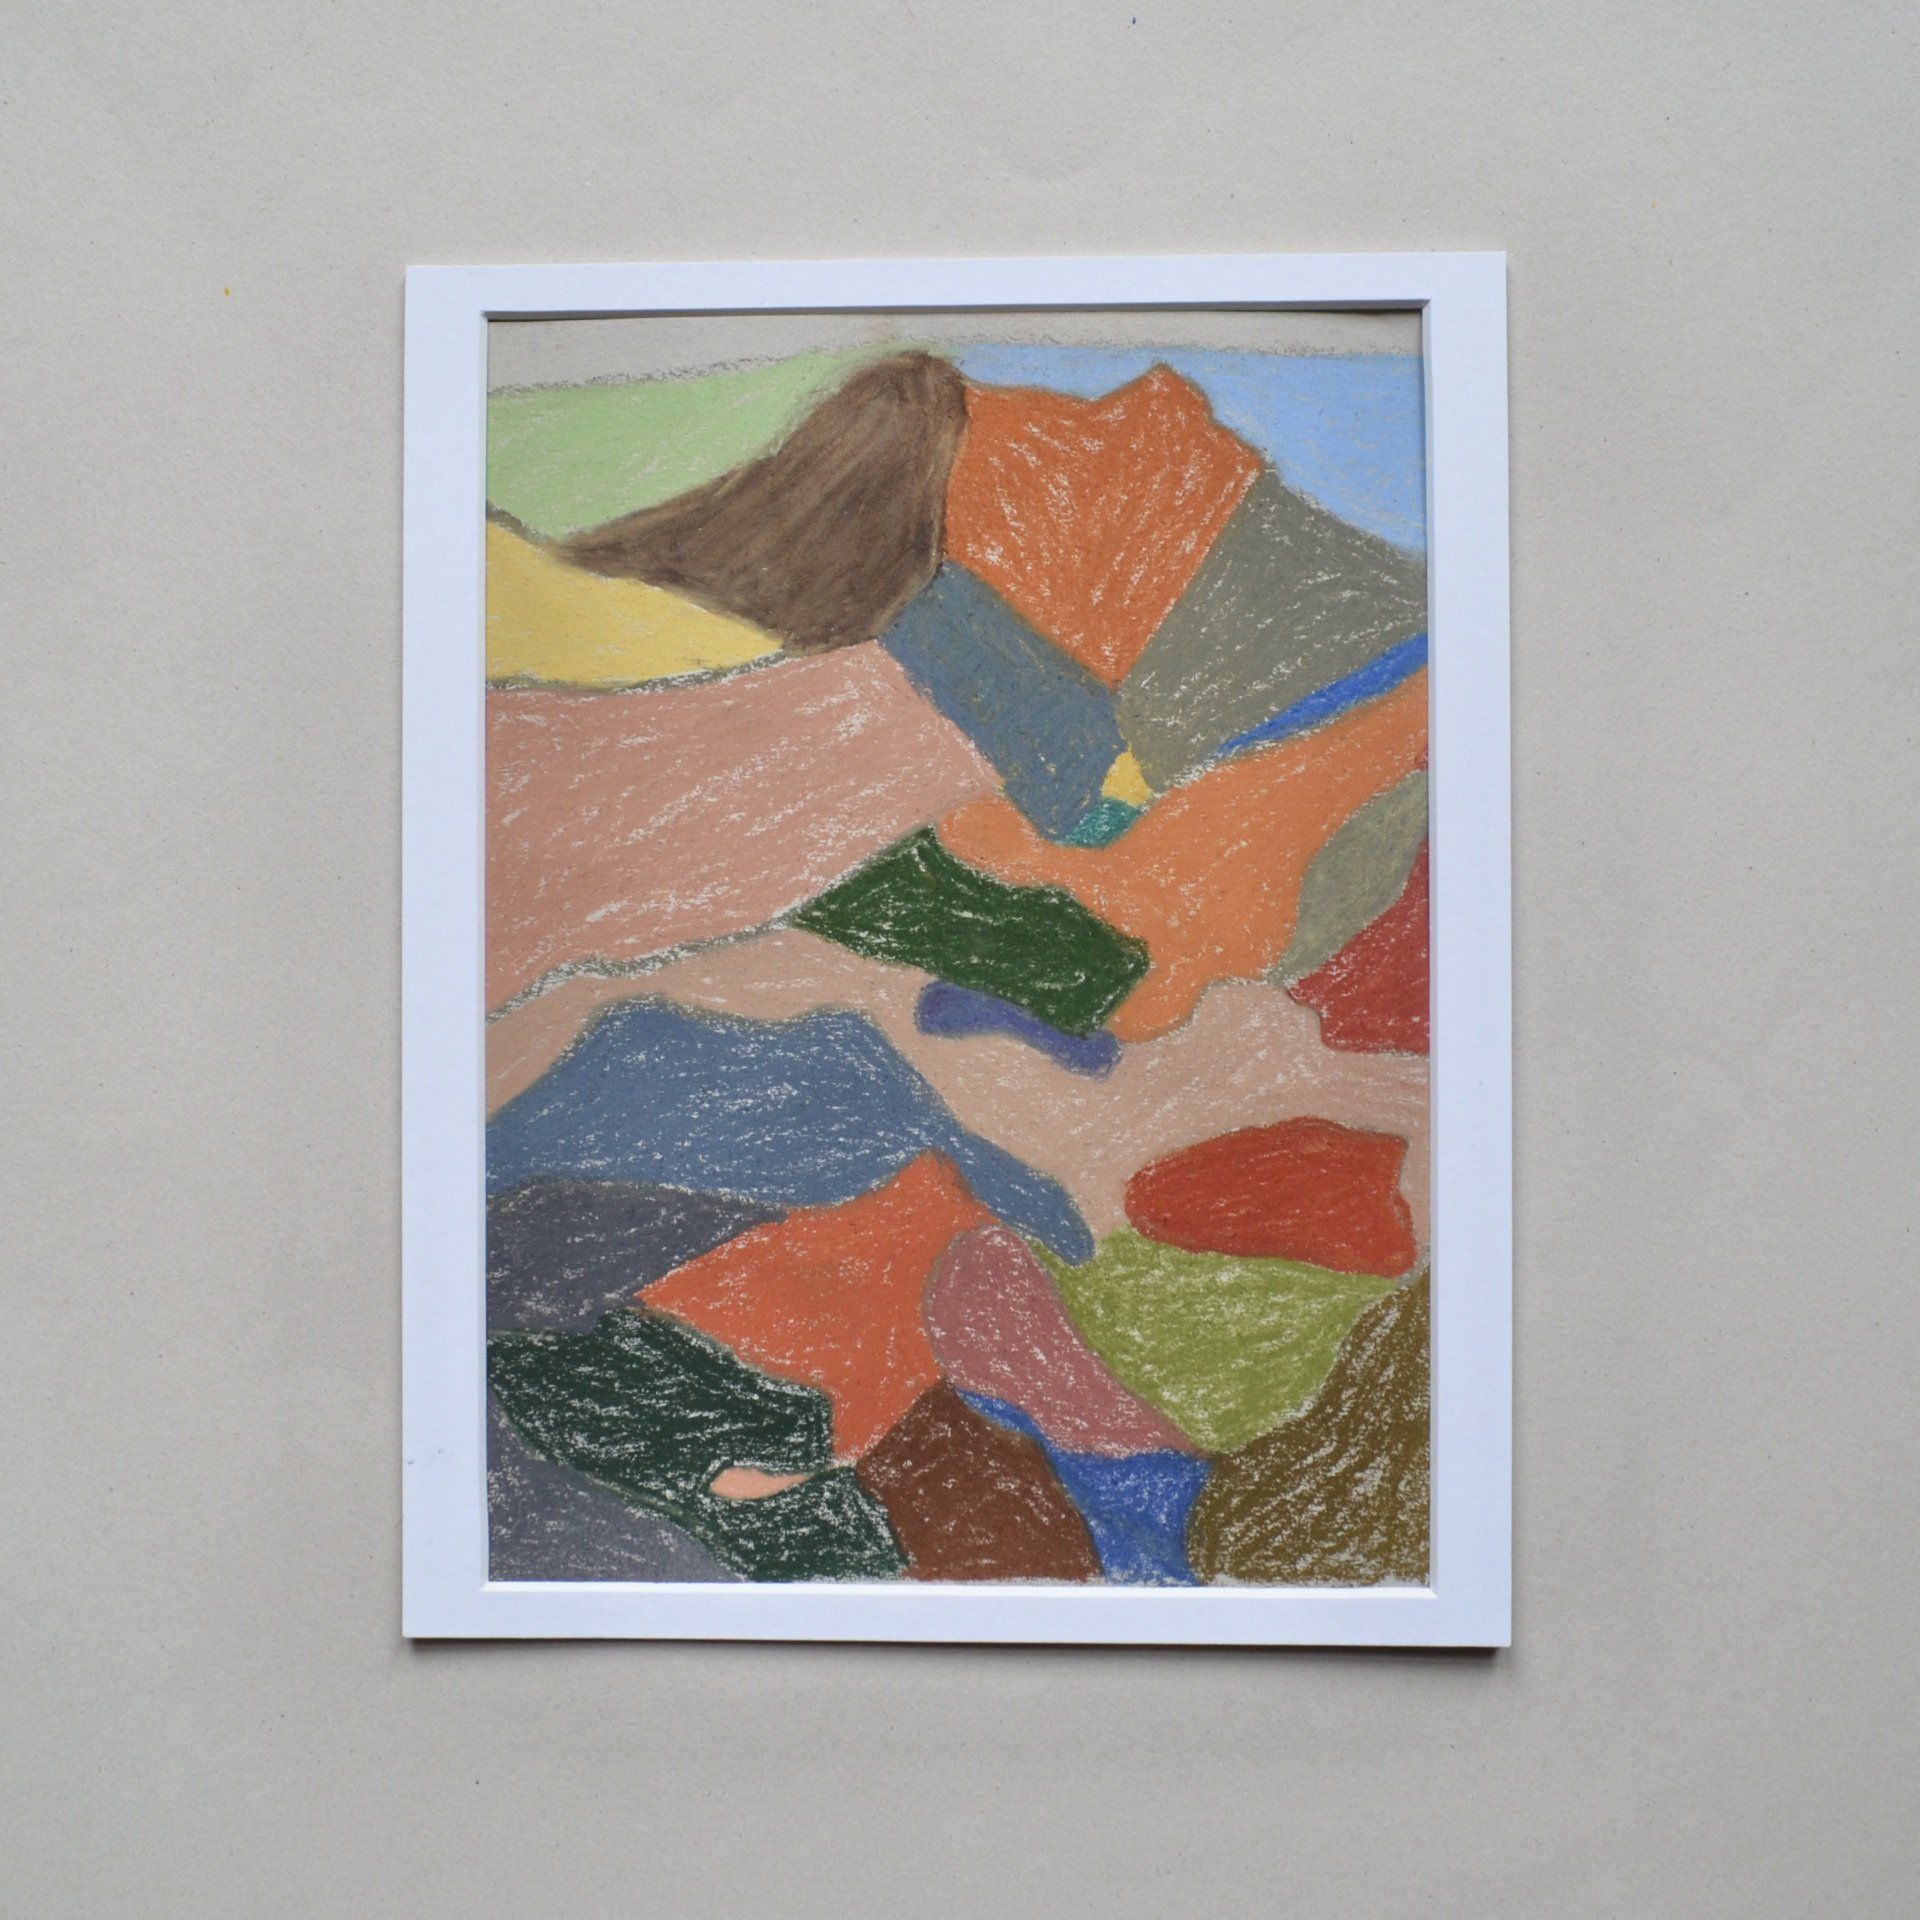 Colourful abstract drawing of mountain with white border on grey background